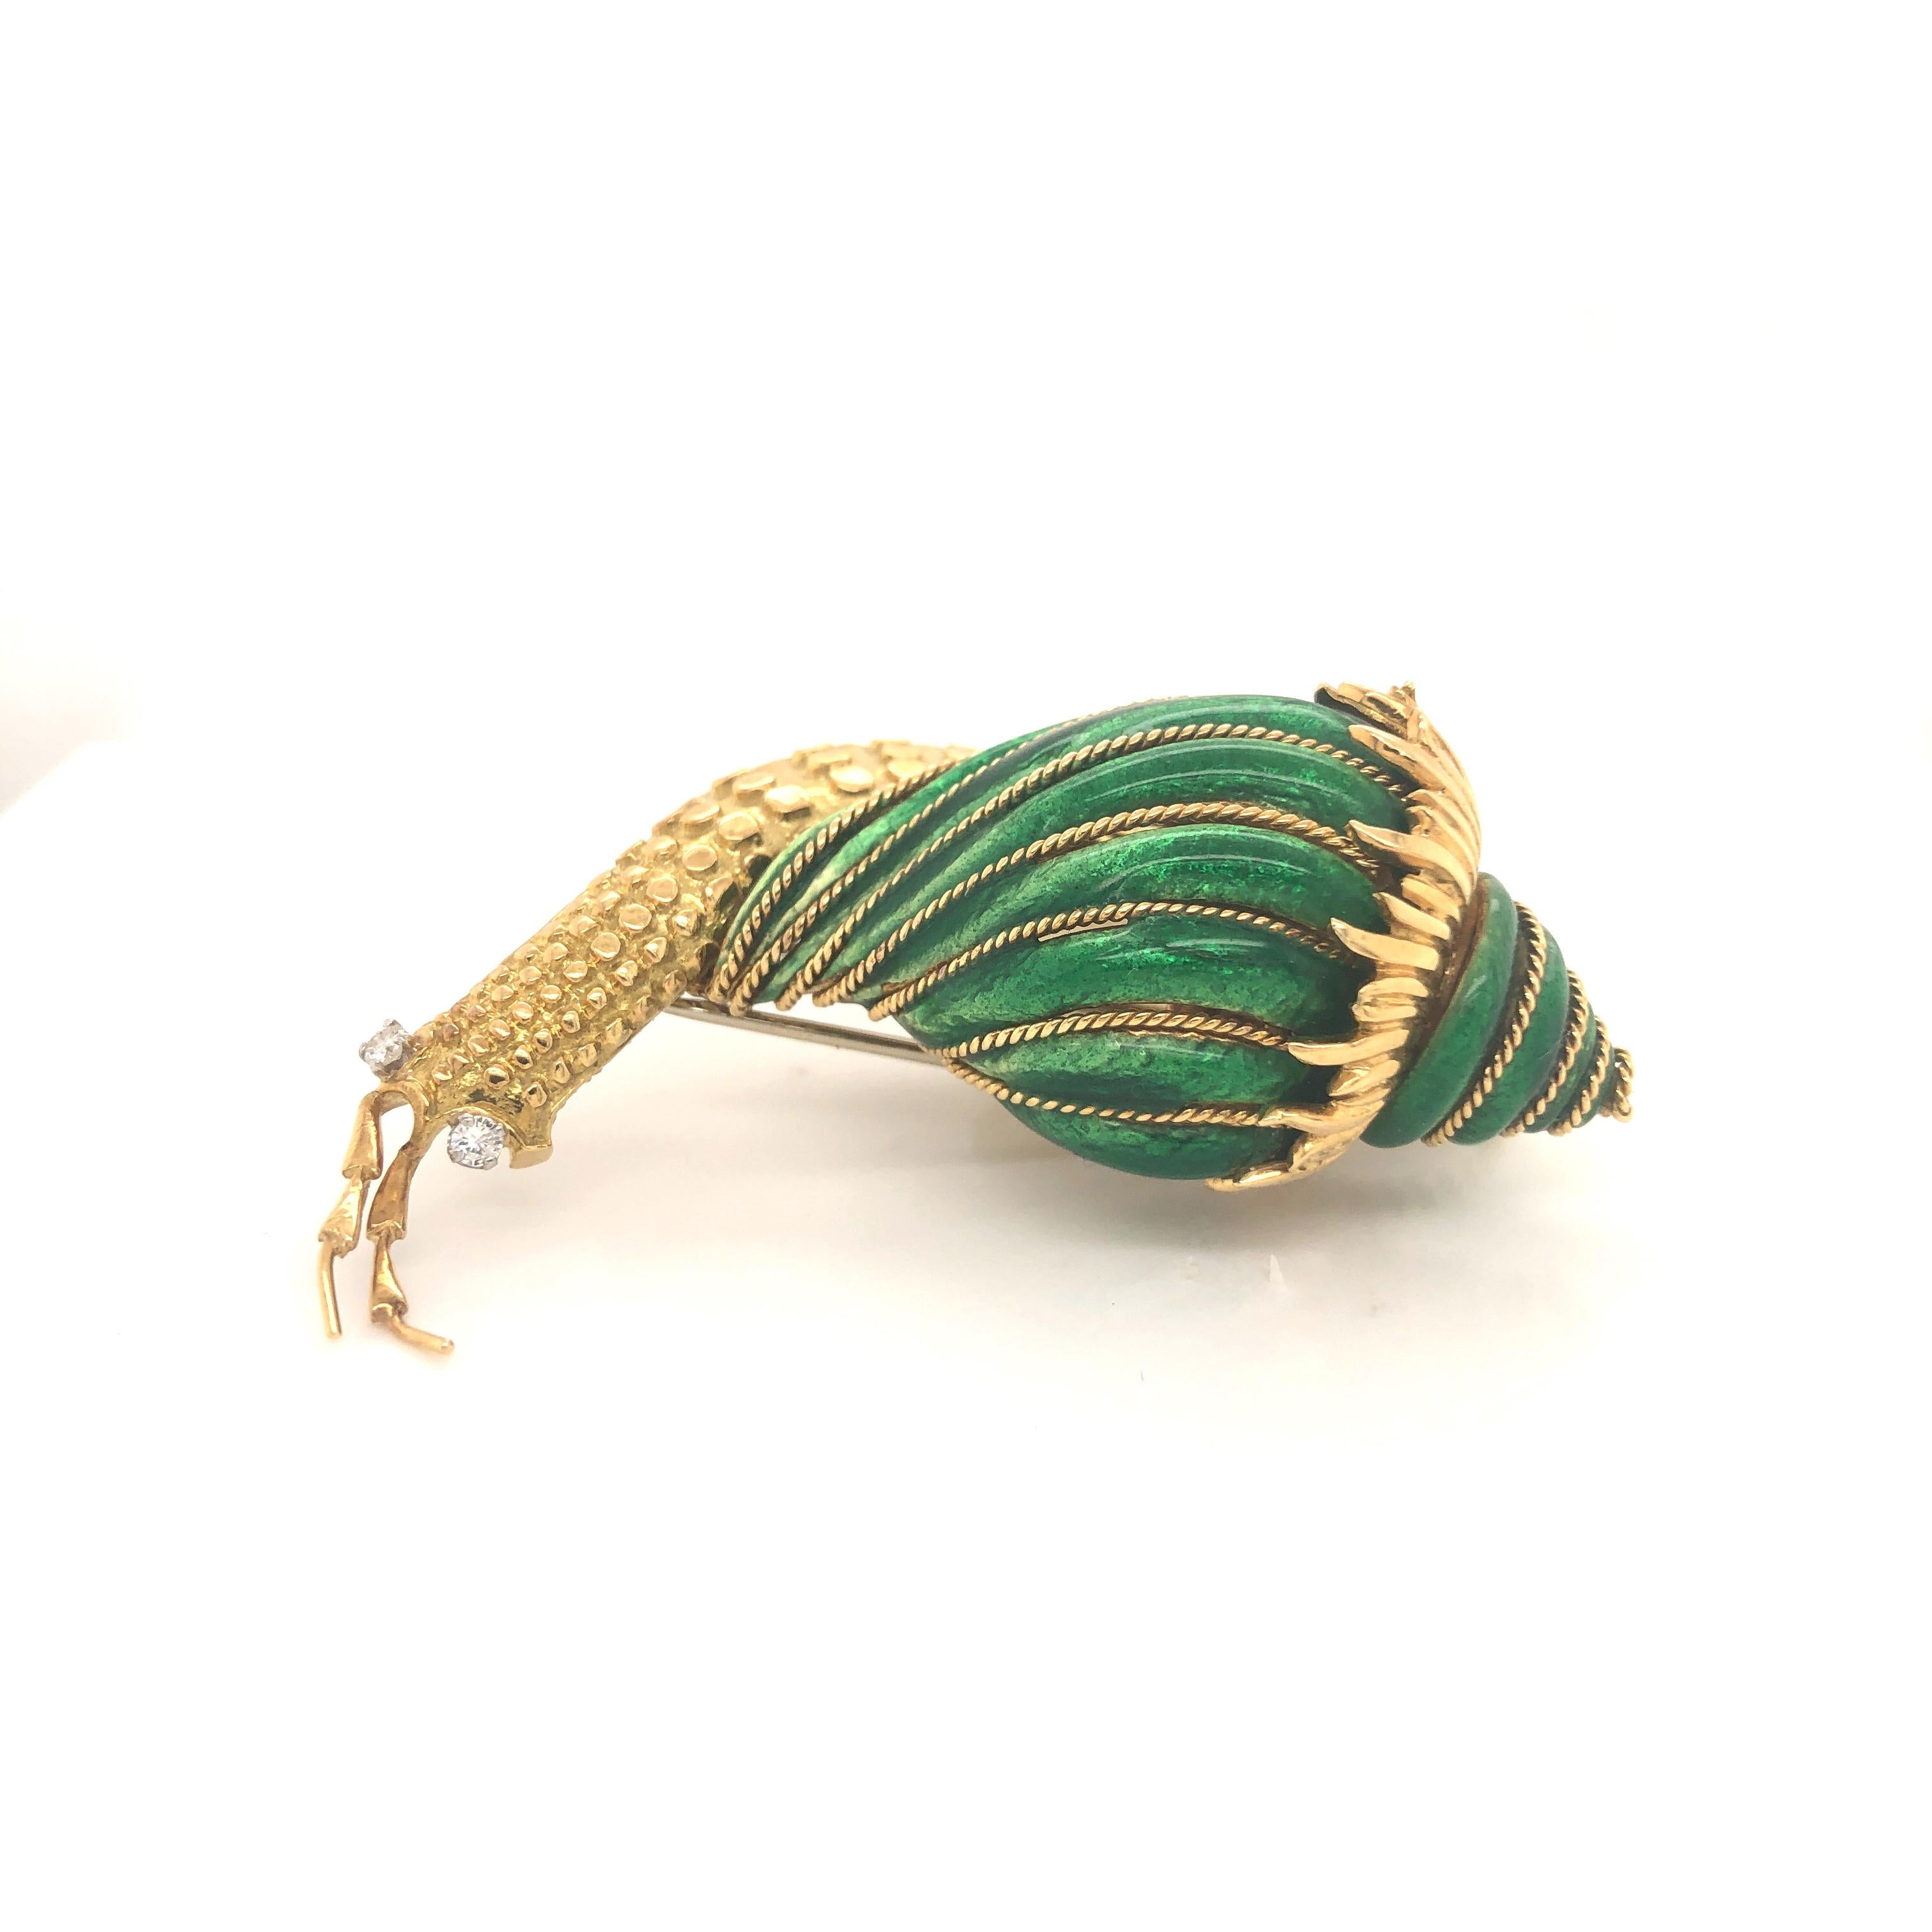 David Webb enamel and diamond 18 karat gold snail clip brooch circa 1980. The design features a representation of a snail in forward march carrying its striped, brilliant green enameled shell embellished with corded gold. The diamond-set eyes